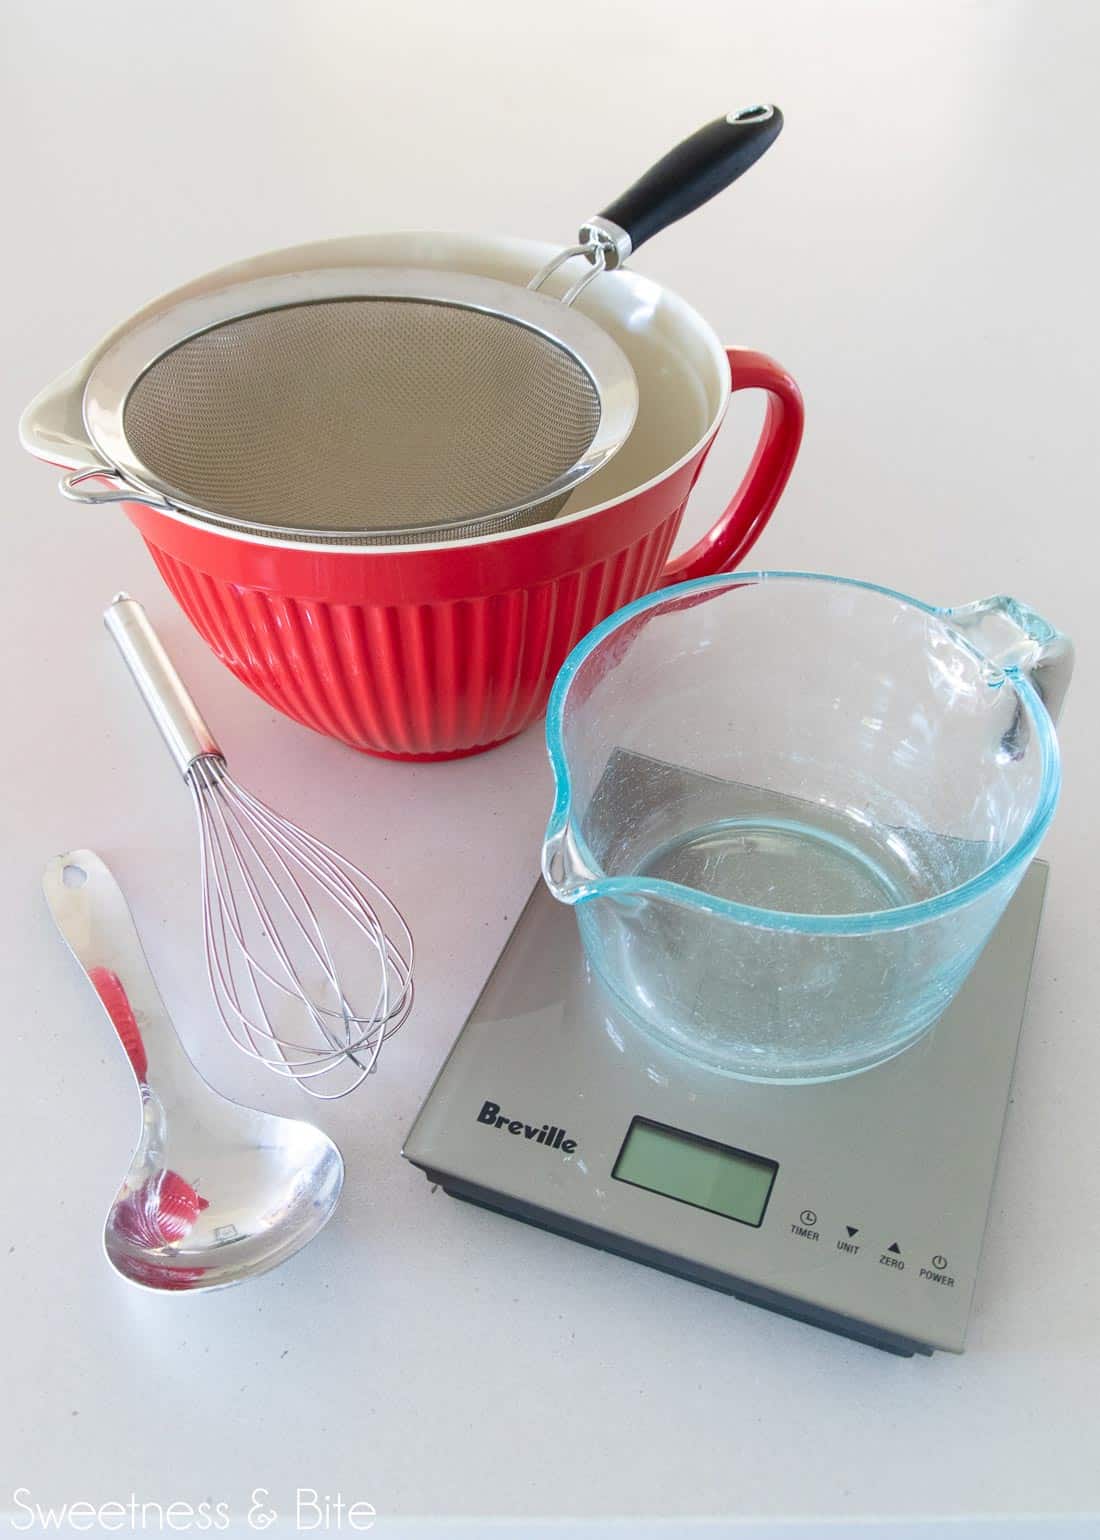 Tools for mixing up the flour blend - bowls, sieve, spoon, whisk and kitchen scales.